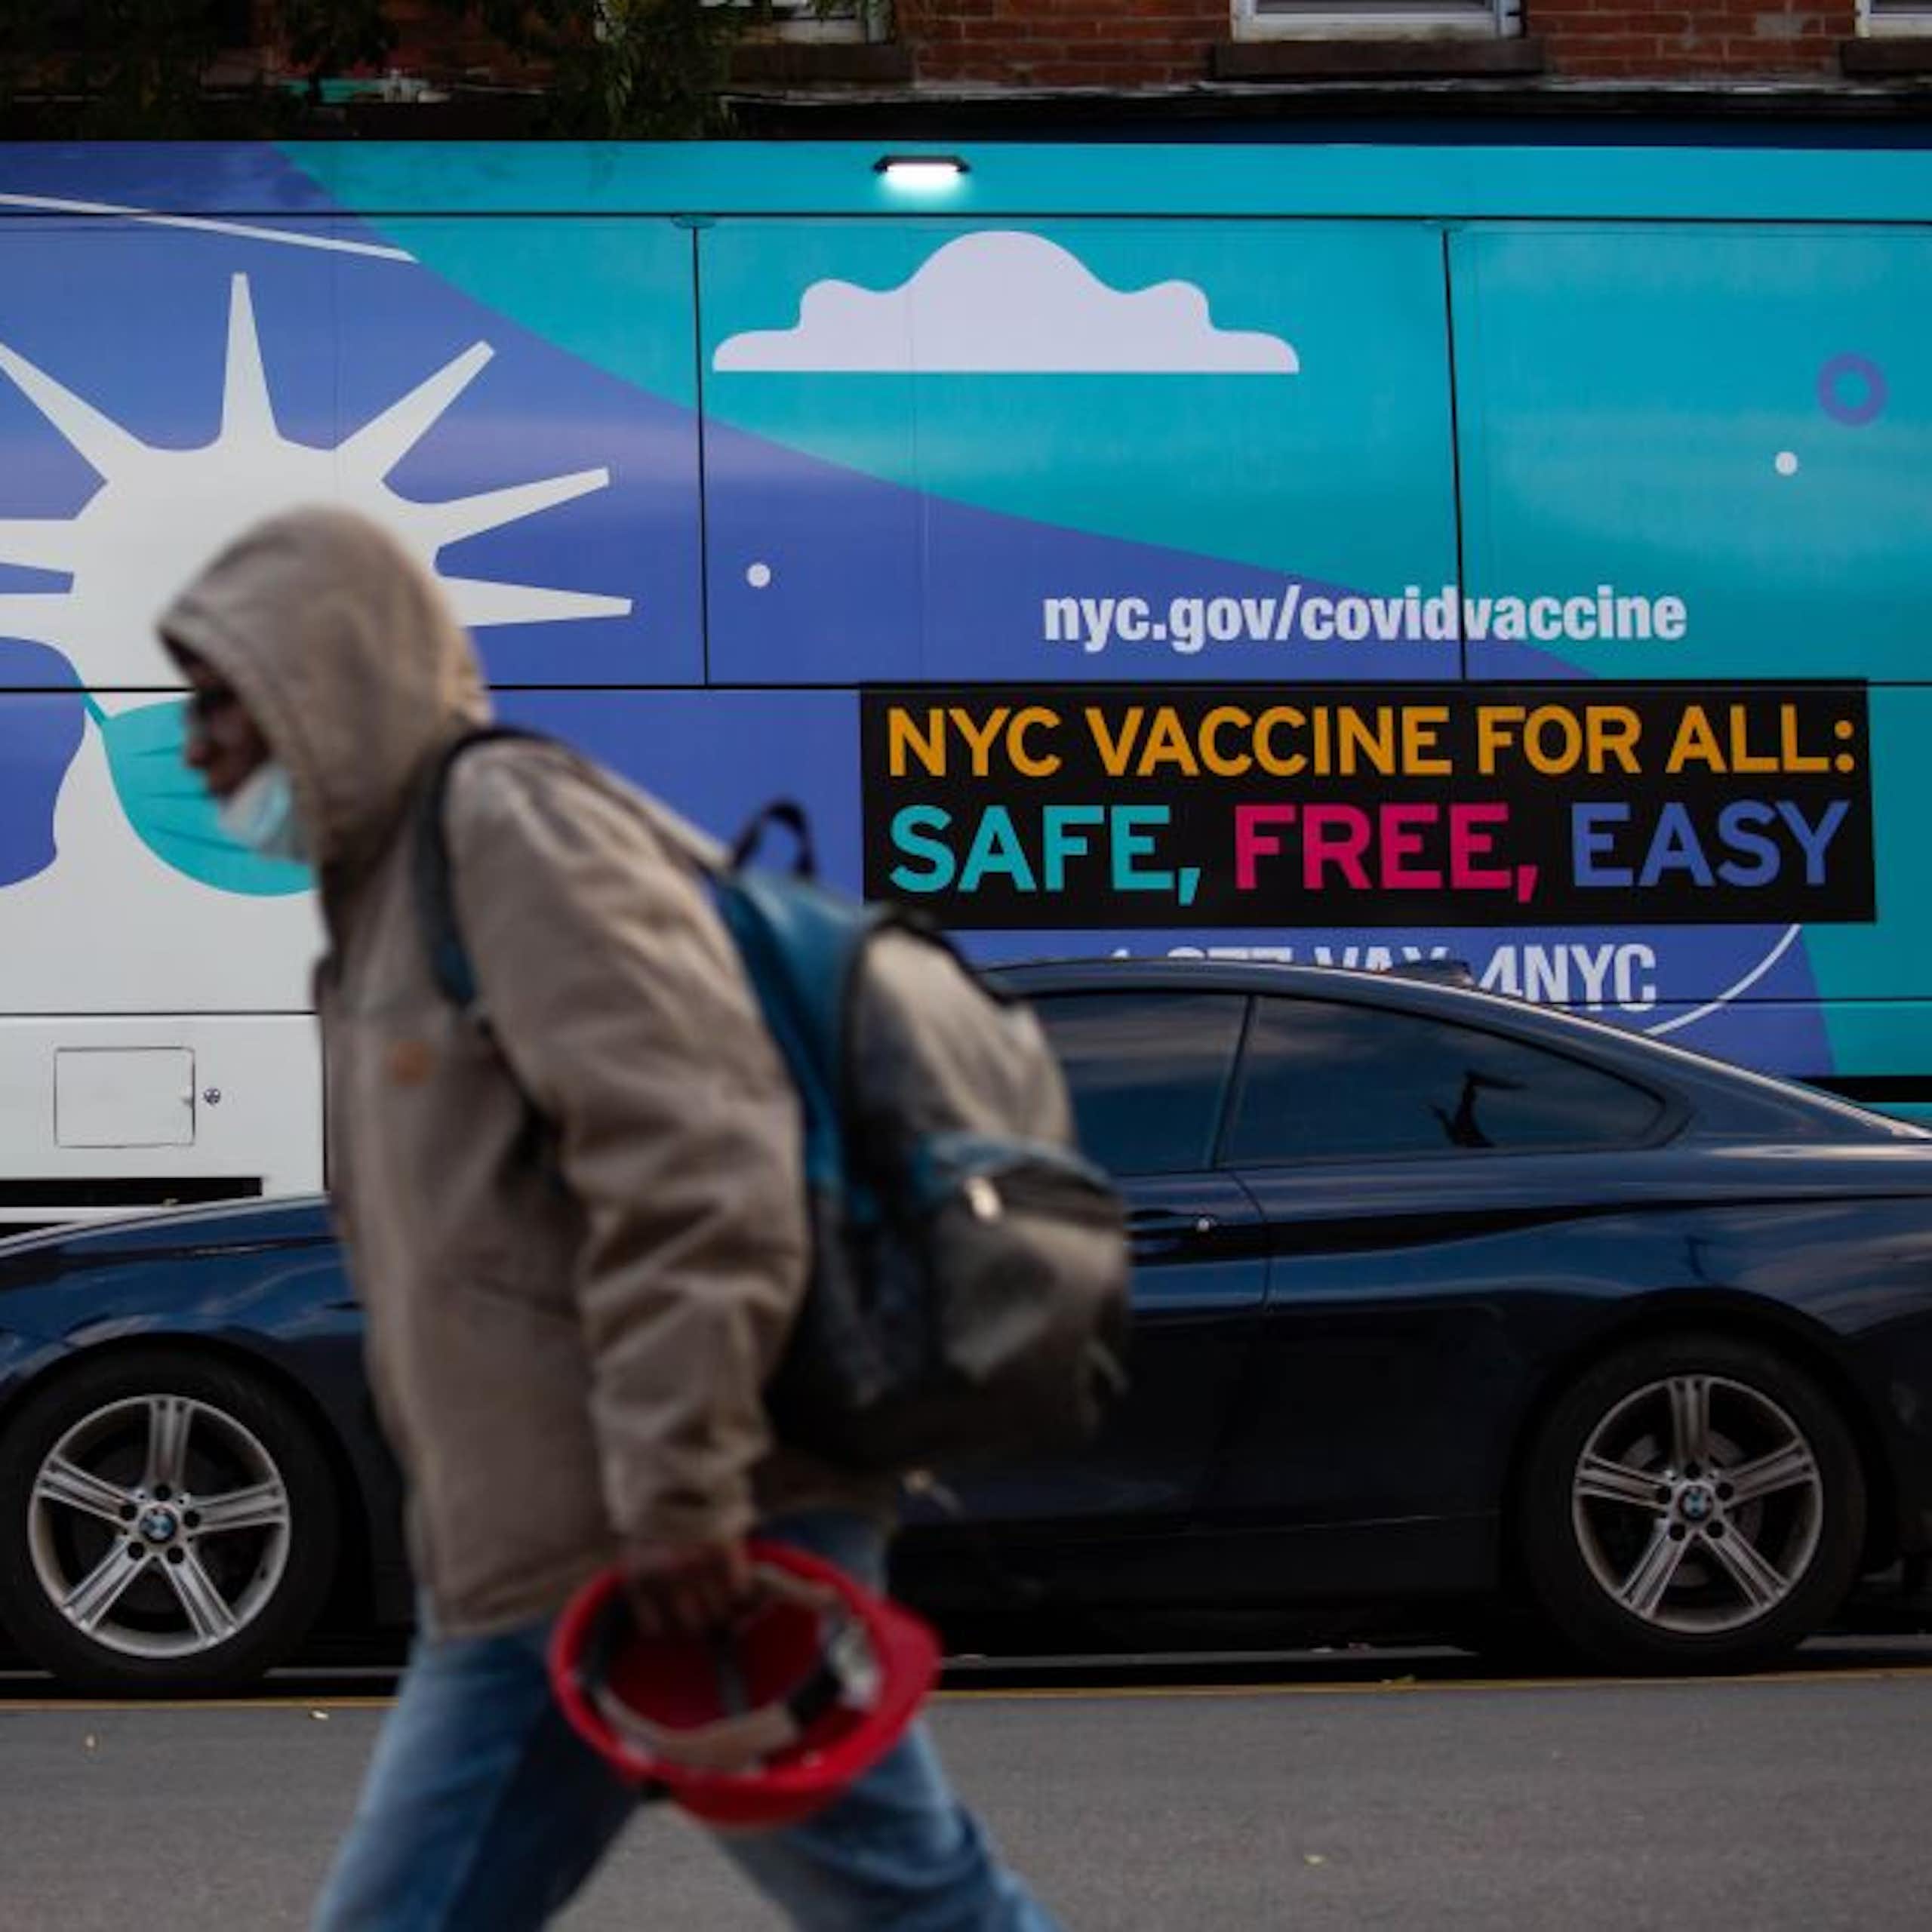 A pedestrian walks in front of a van with an ad that says "NYC VACCINE FOR ALL: SAFE, FREE, EASY"  